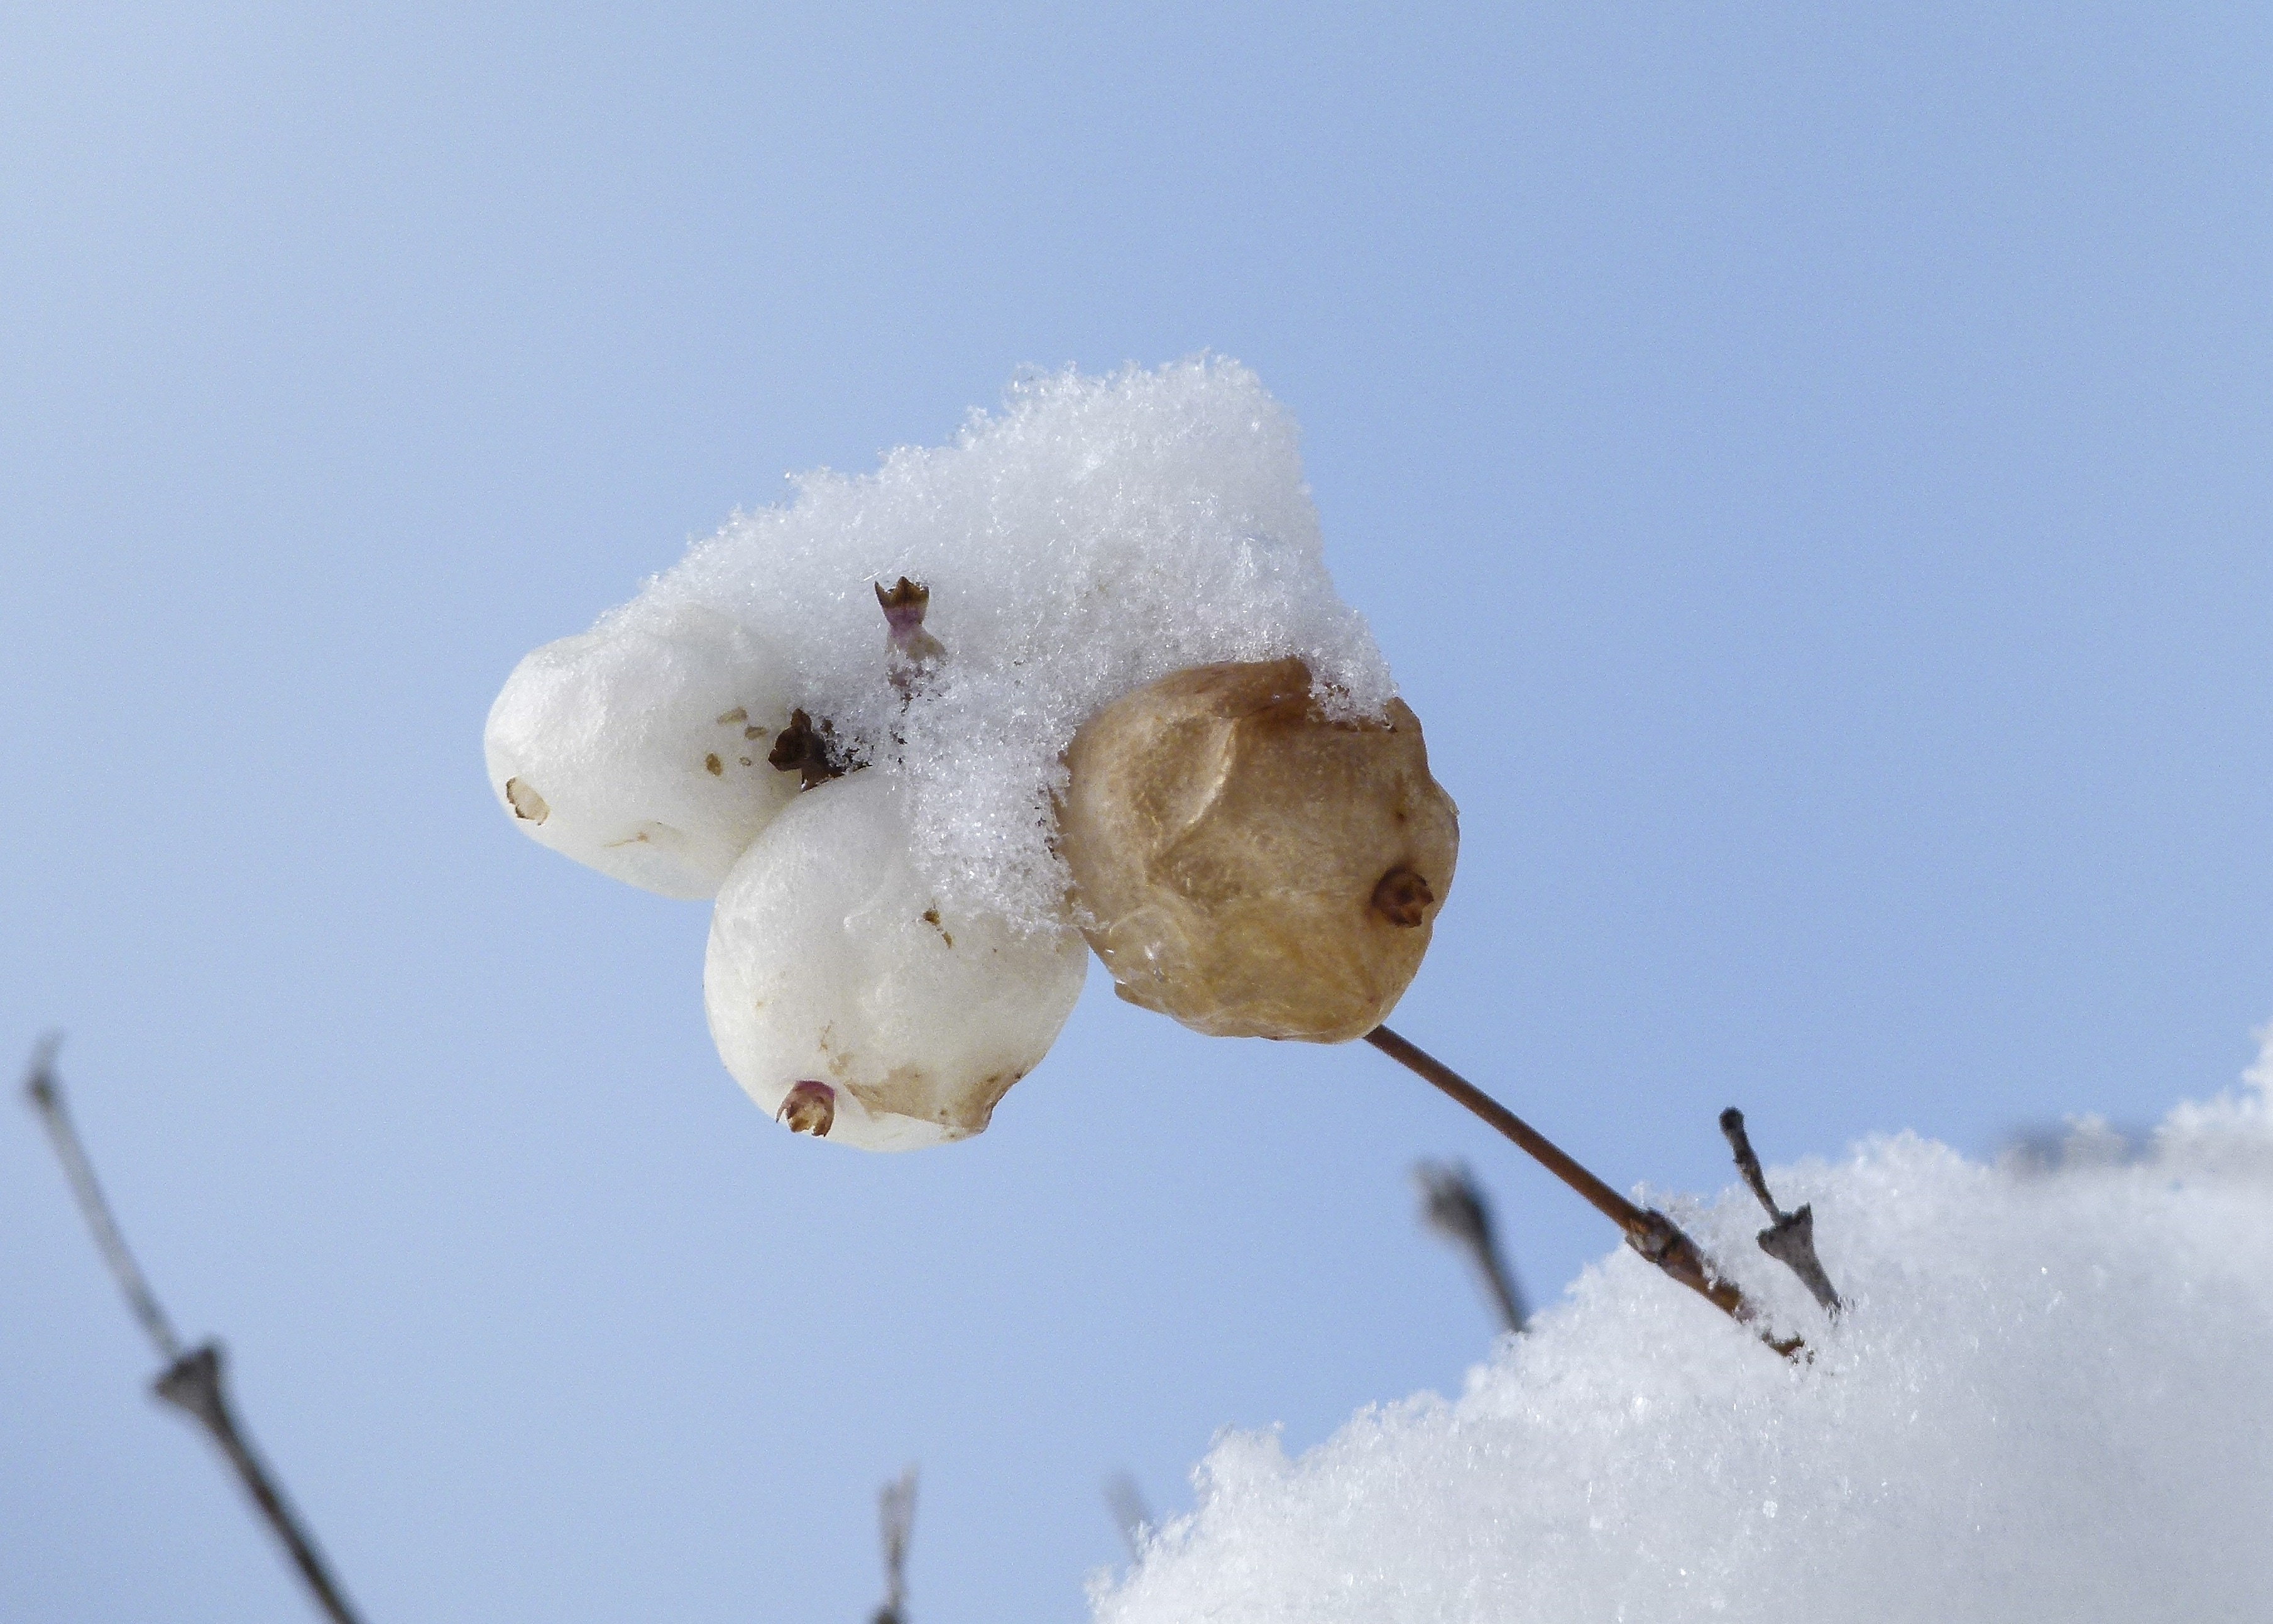 white and brown fruit near snow